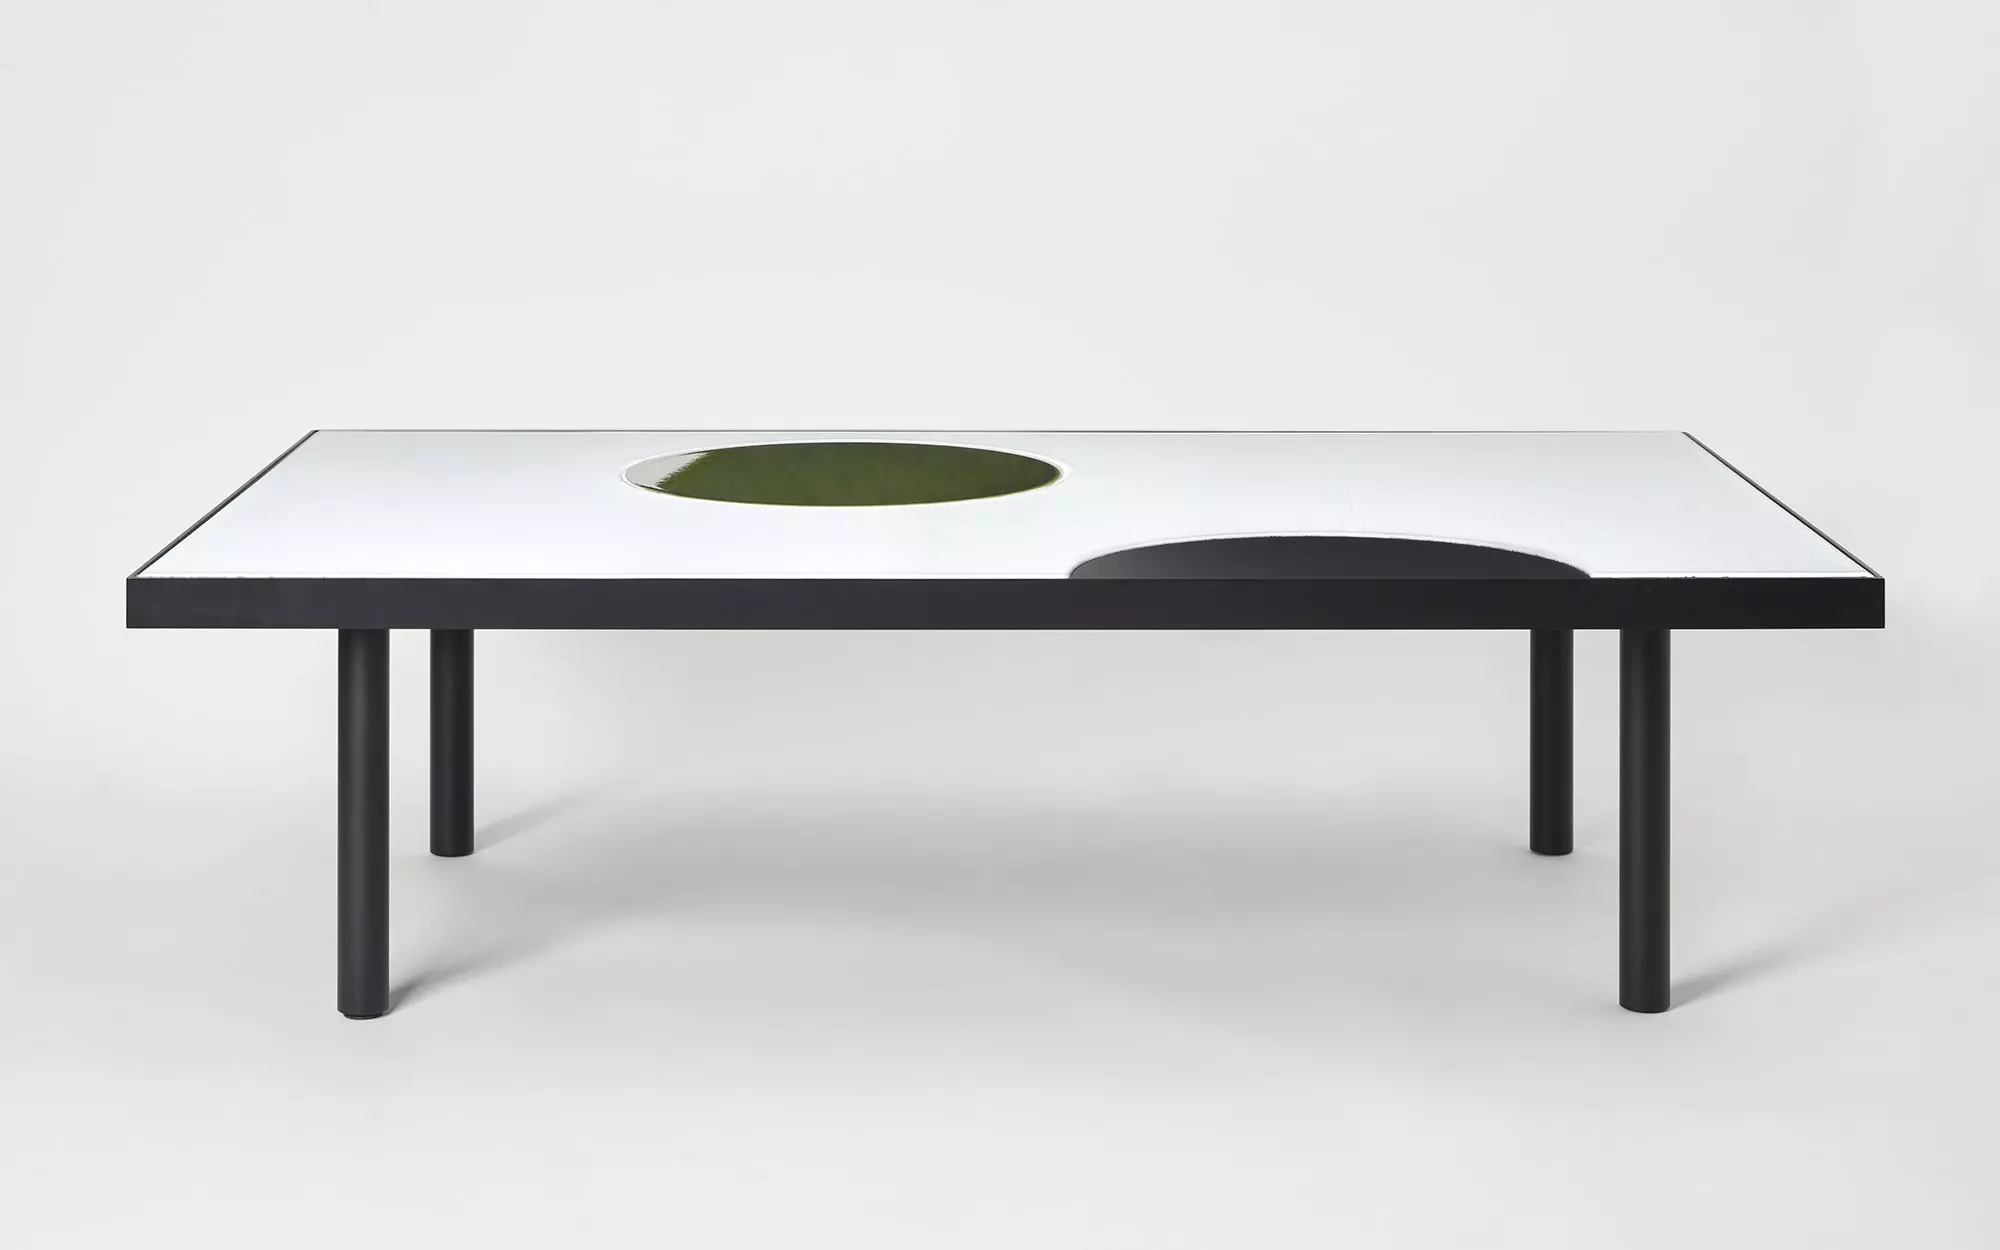 Translation Discolo Coffee Table - Pierre Charpin - Coffee table - Galerie kreo